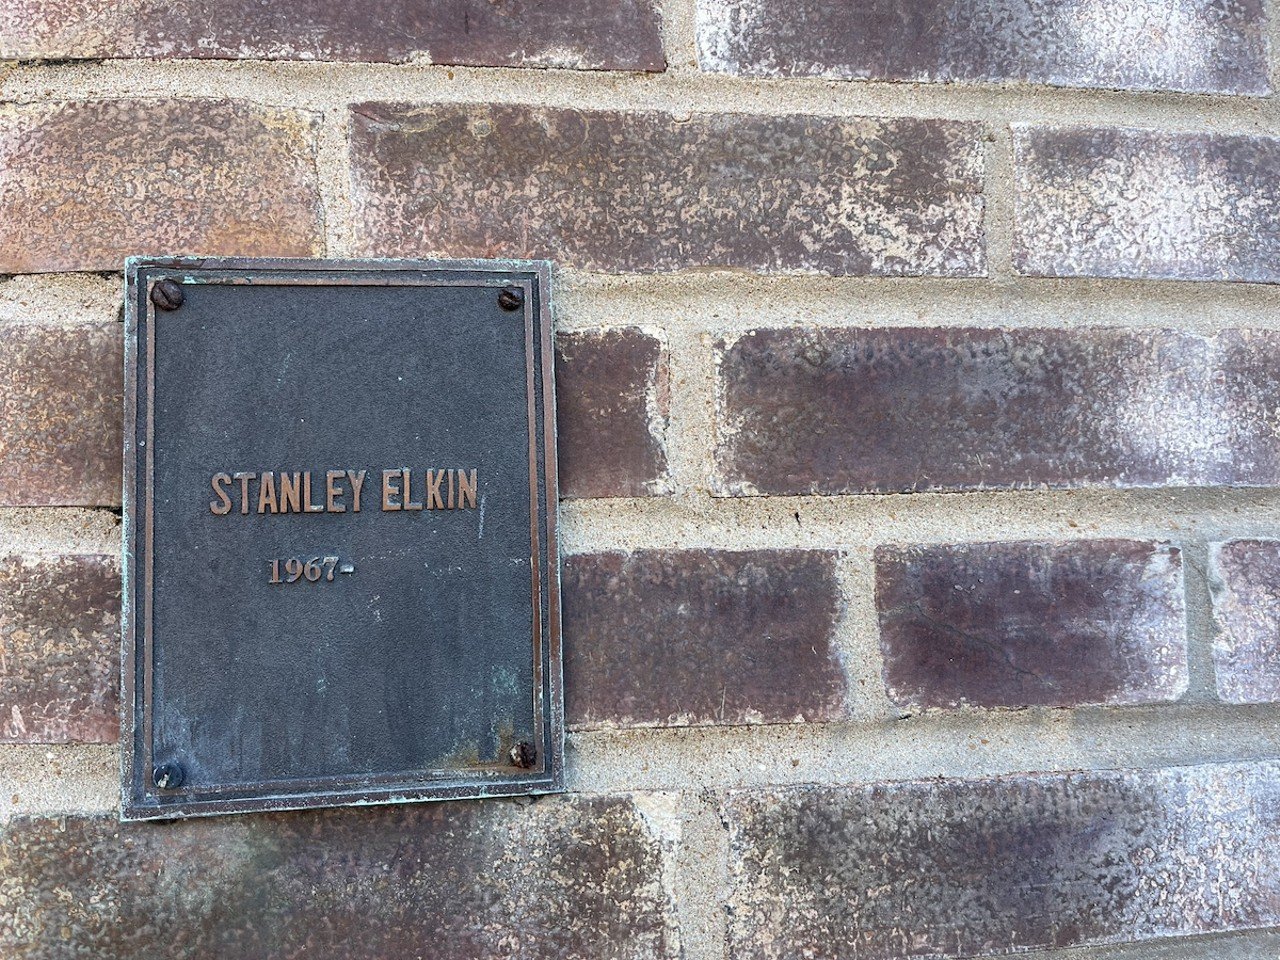 A plaque adorning the backside of Stanley Elkin&rsquo;s former home on Westgate Avenue reads &ldquo;Stanley Elkin, 1967 -&rdquo;, and the absence of a final year gives the sense that his energy still imbues the place. The current homeowners, a musician and a ceramicist, are certainly fitting stewards of that energy. The couple bought the home from an Elkin family trust after Stanley&rsquo;s wife, Joan, an accomplished artist in her own right, died last year. The house came with two of Elkin&rsquo;s books, including a collection of novellas, the first of which, Her Sense of Timing, takes place at the home.
&ldquo;Oh, my God, this is my house,&rdquo; the current owner says, recounting her experience reading that book. &ldquo;It was crazy. I got such insight into the people who used to live here.&rdquo; Another insight: Unusual for a city pad, the erstwhile Elkin estate has a kickass swimming pool.